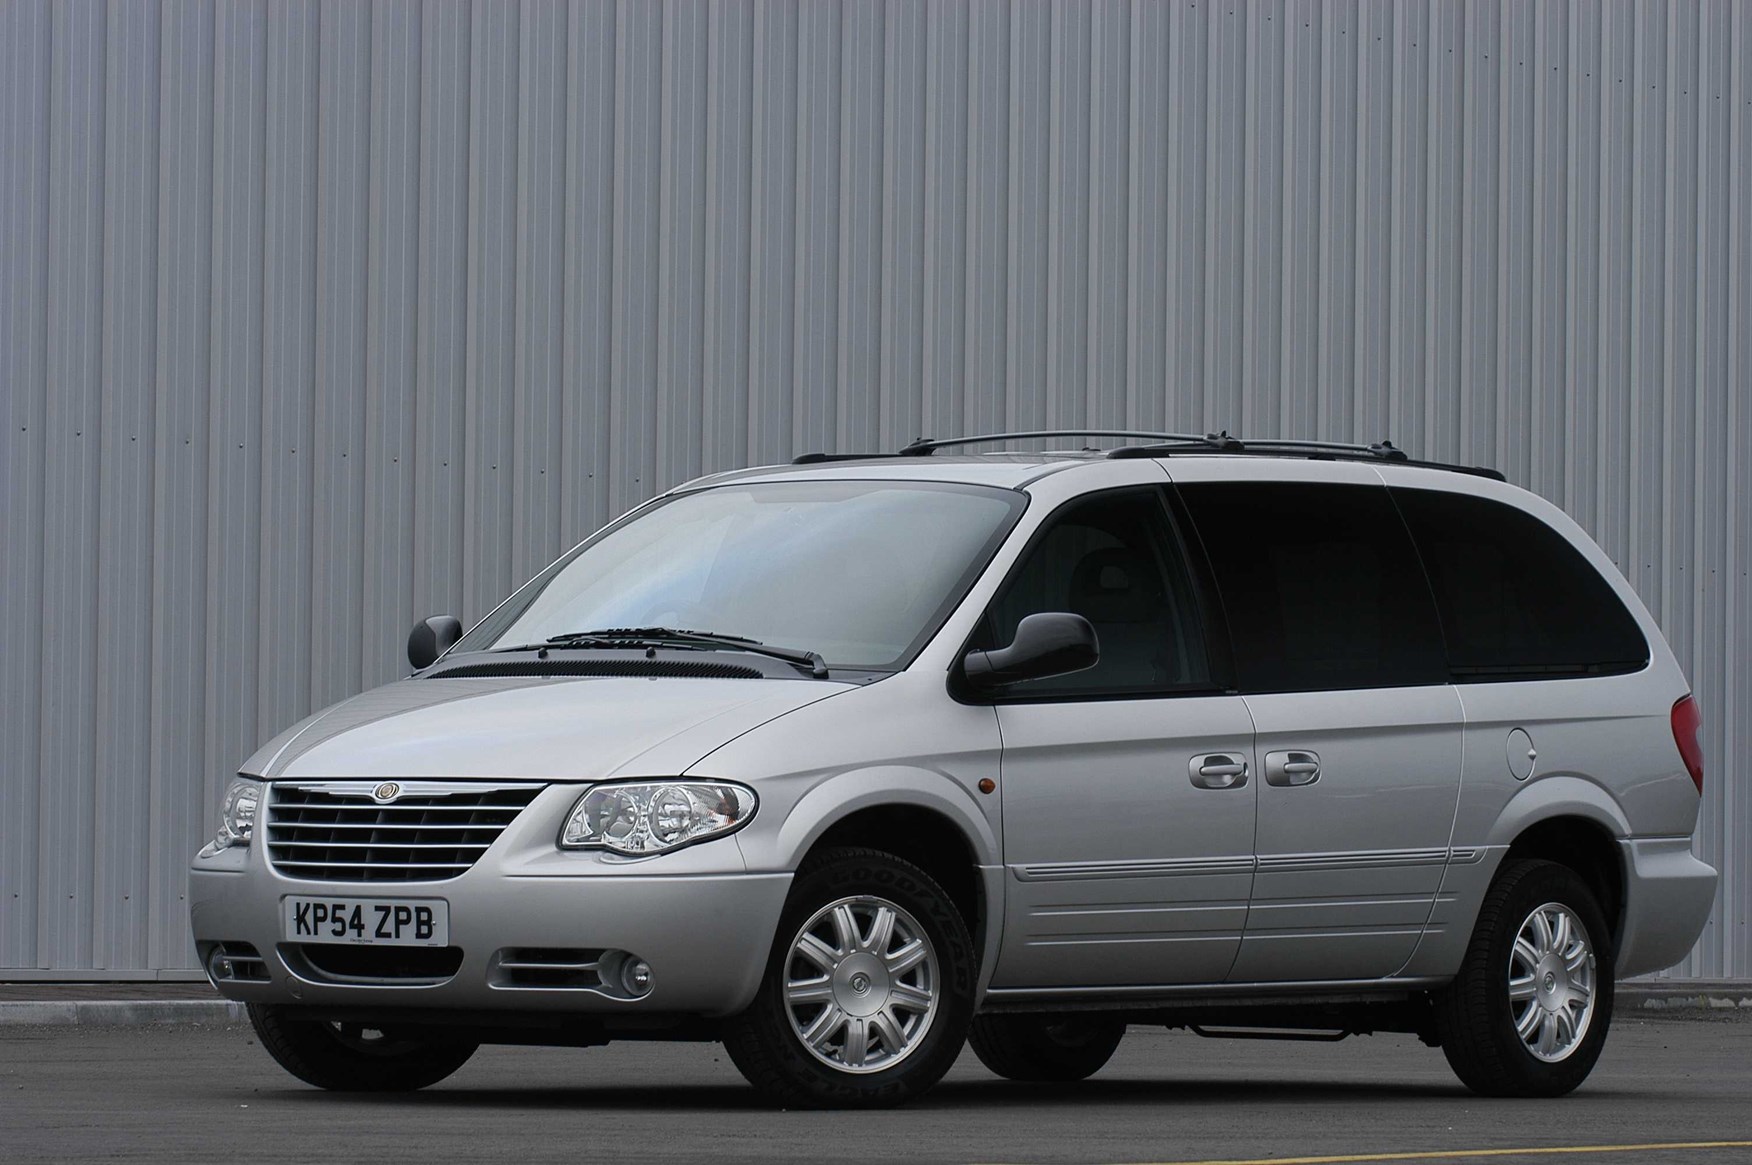 Used Chrysler Grand Voyager Estate (2001 2008) Review